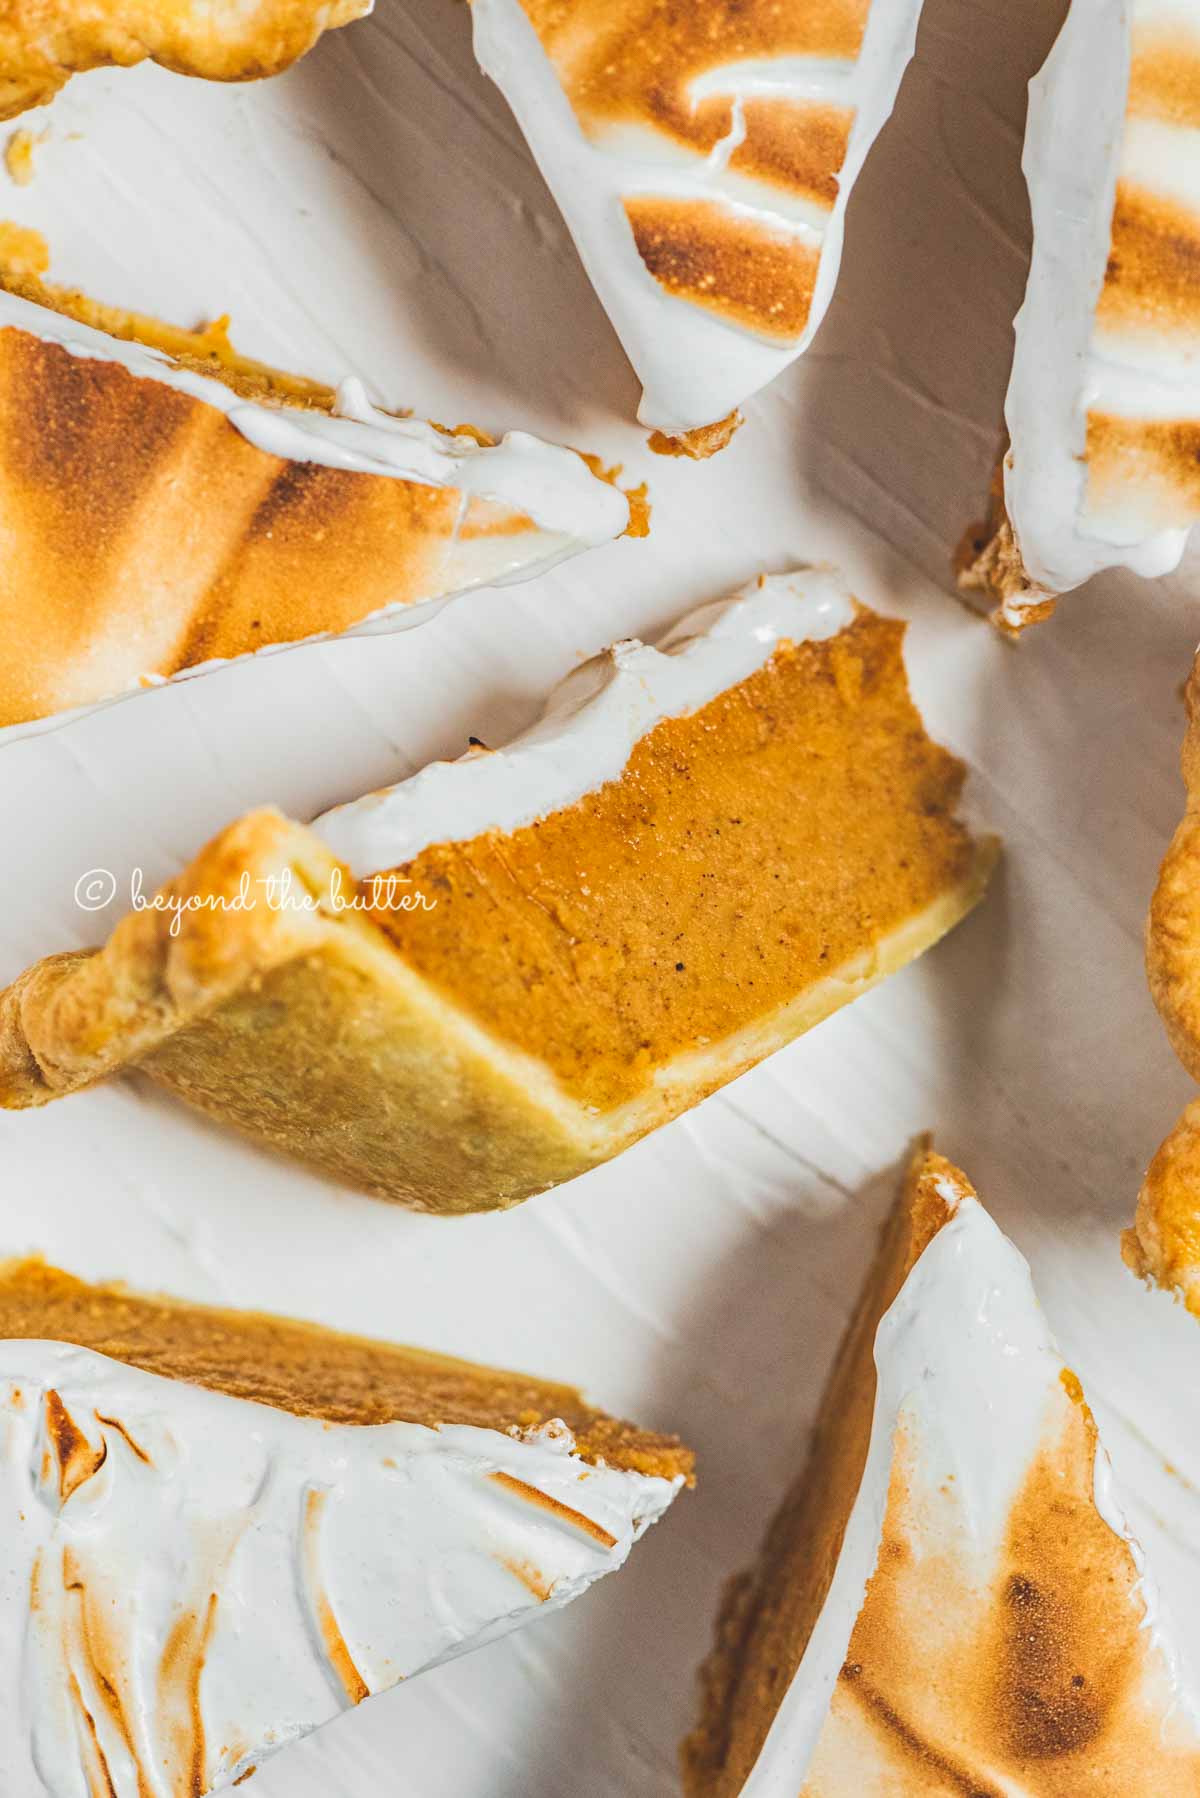 Slices of brown sugar sweet potato pie with center slice on its side | All Images © Beyond the Butter®